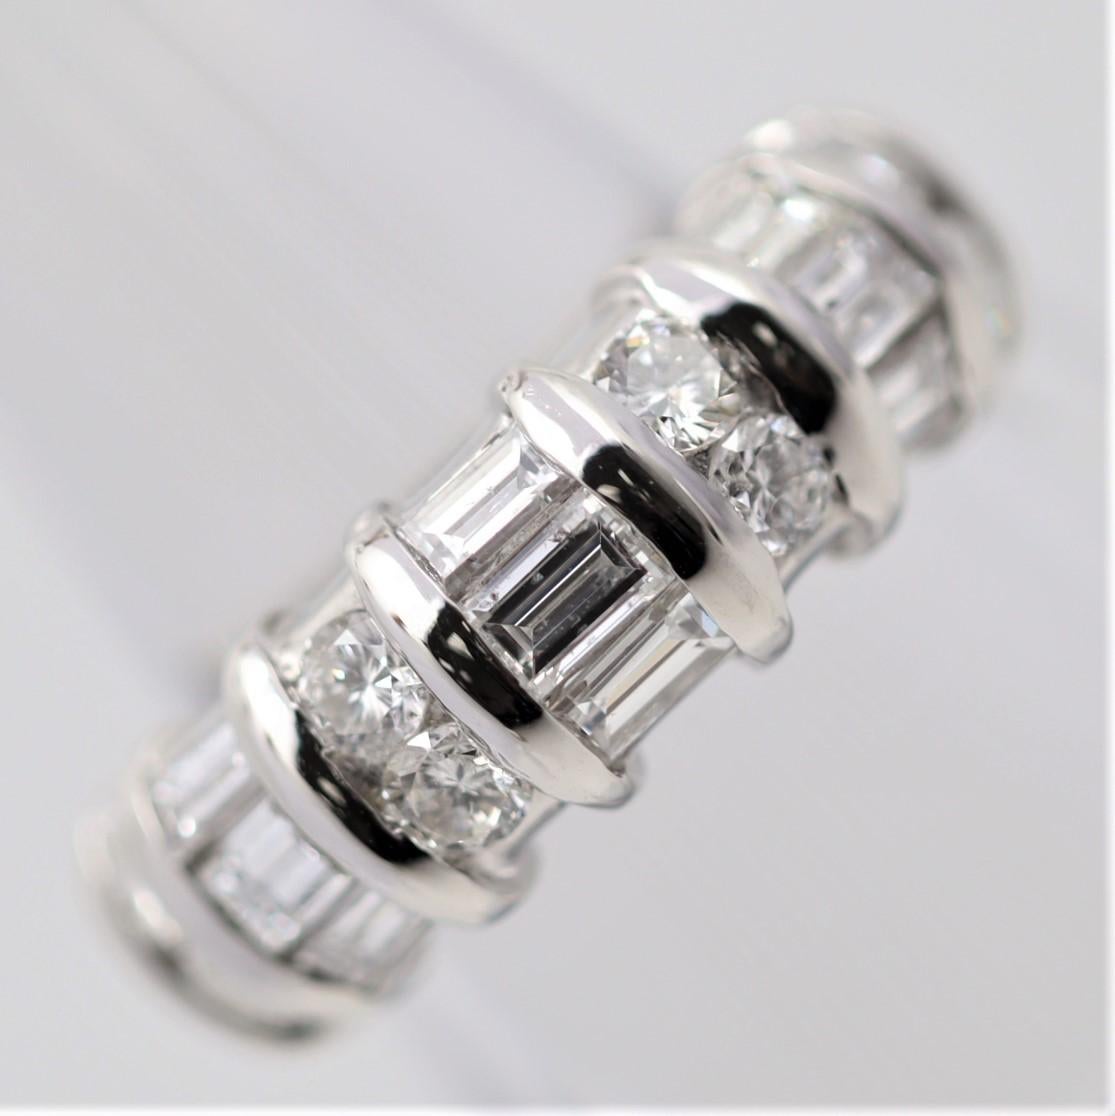 A simple yet substantial diamond platinum band featuring alternating round and baguette-cut diamonds. They weigh a total of 1.97 carats and are white and bright. Hand-fabricated in platinum and ready to be worn.

Ring Size 6.25